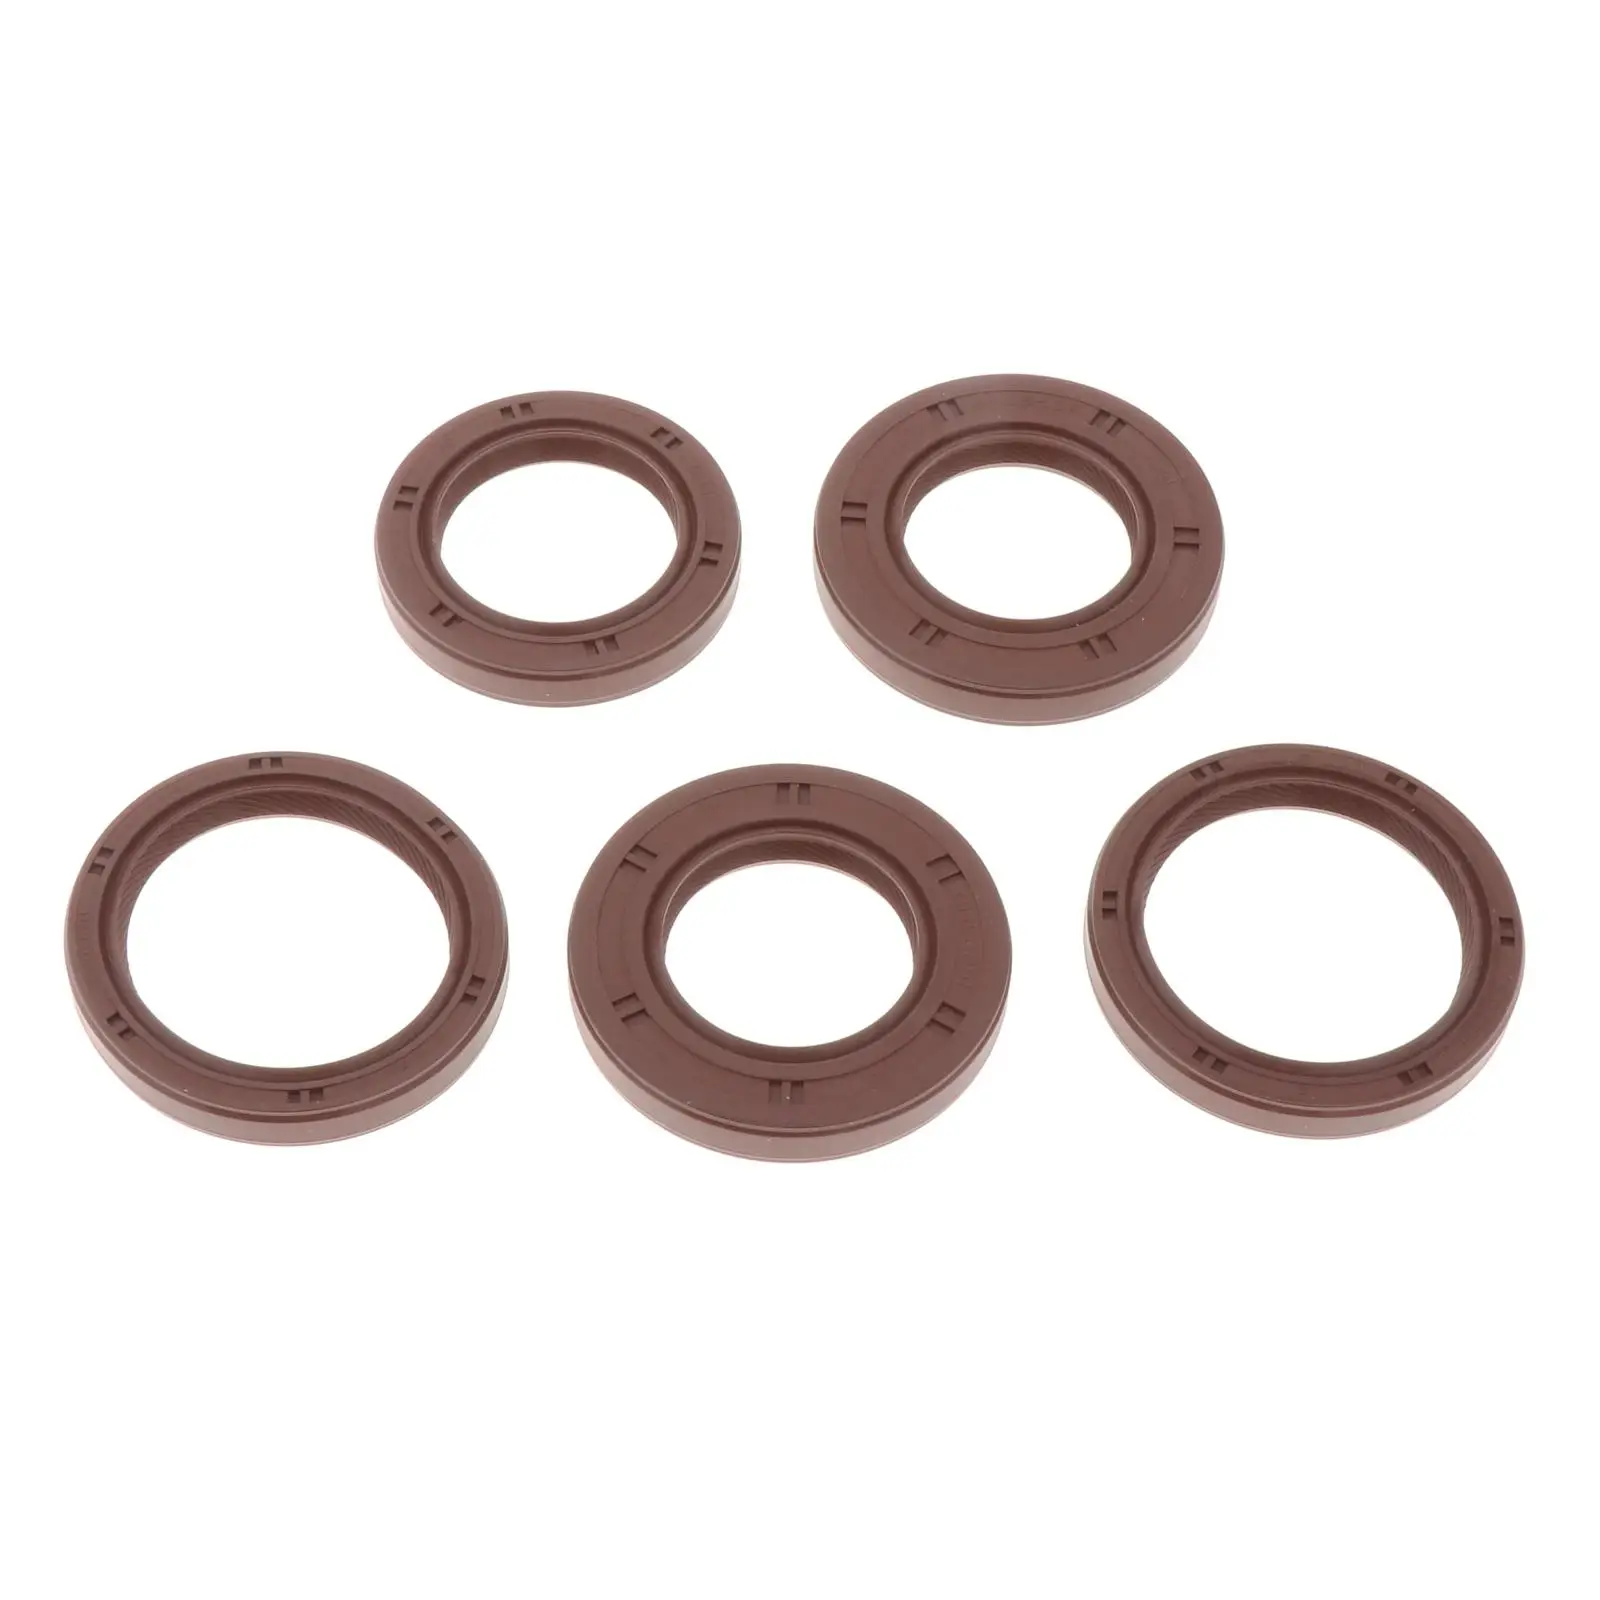 5 Pieces 806732160 Oil Seal Kit Car Supplies for Forester 2004-2013 2.5L